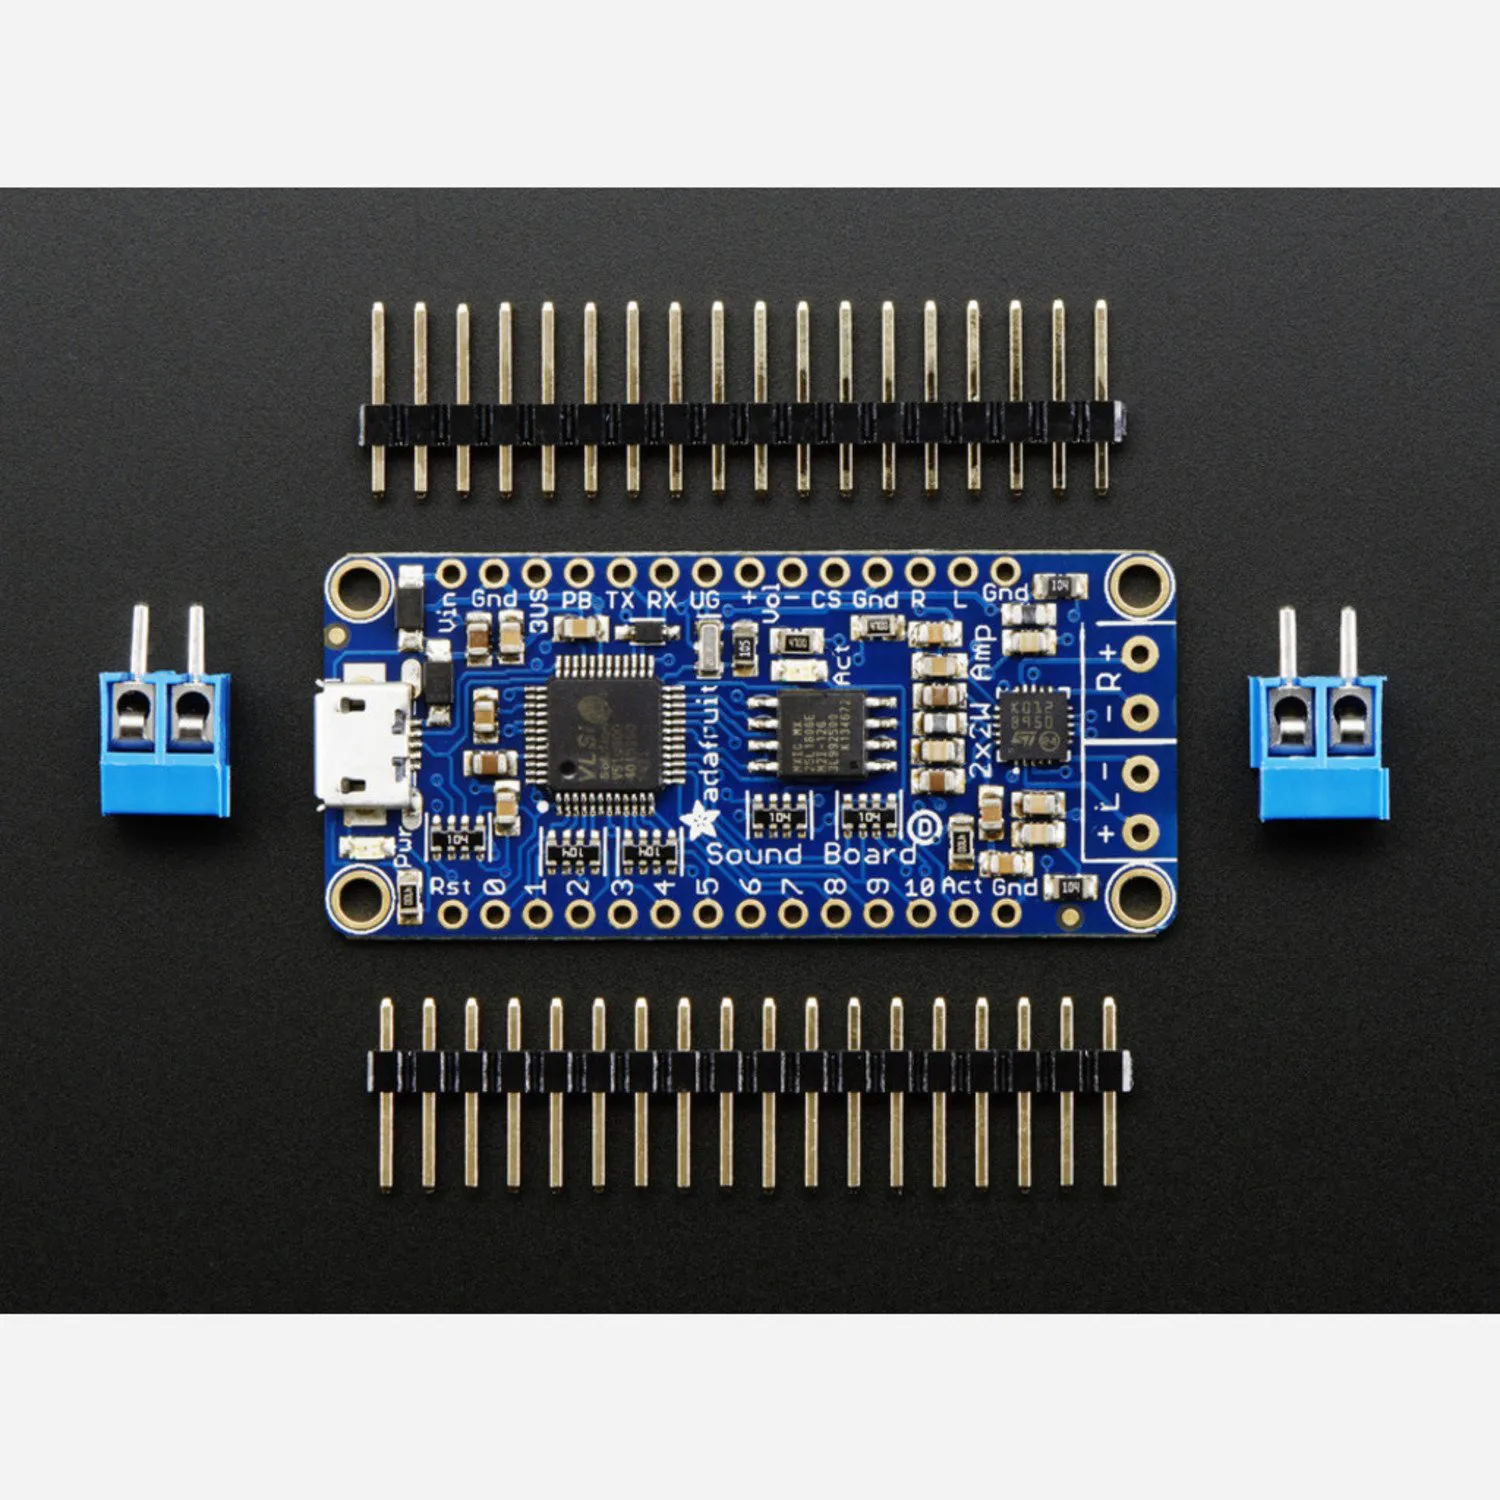 Photo of Adafruit Audio FX Sound Board - WAV/OGG Trigger - 2MB storage with 2.2W Stereo Amp